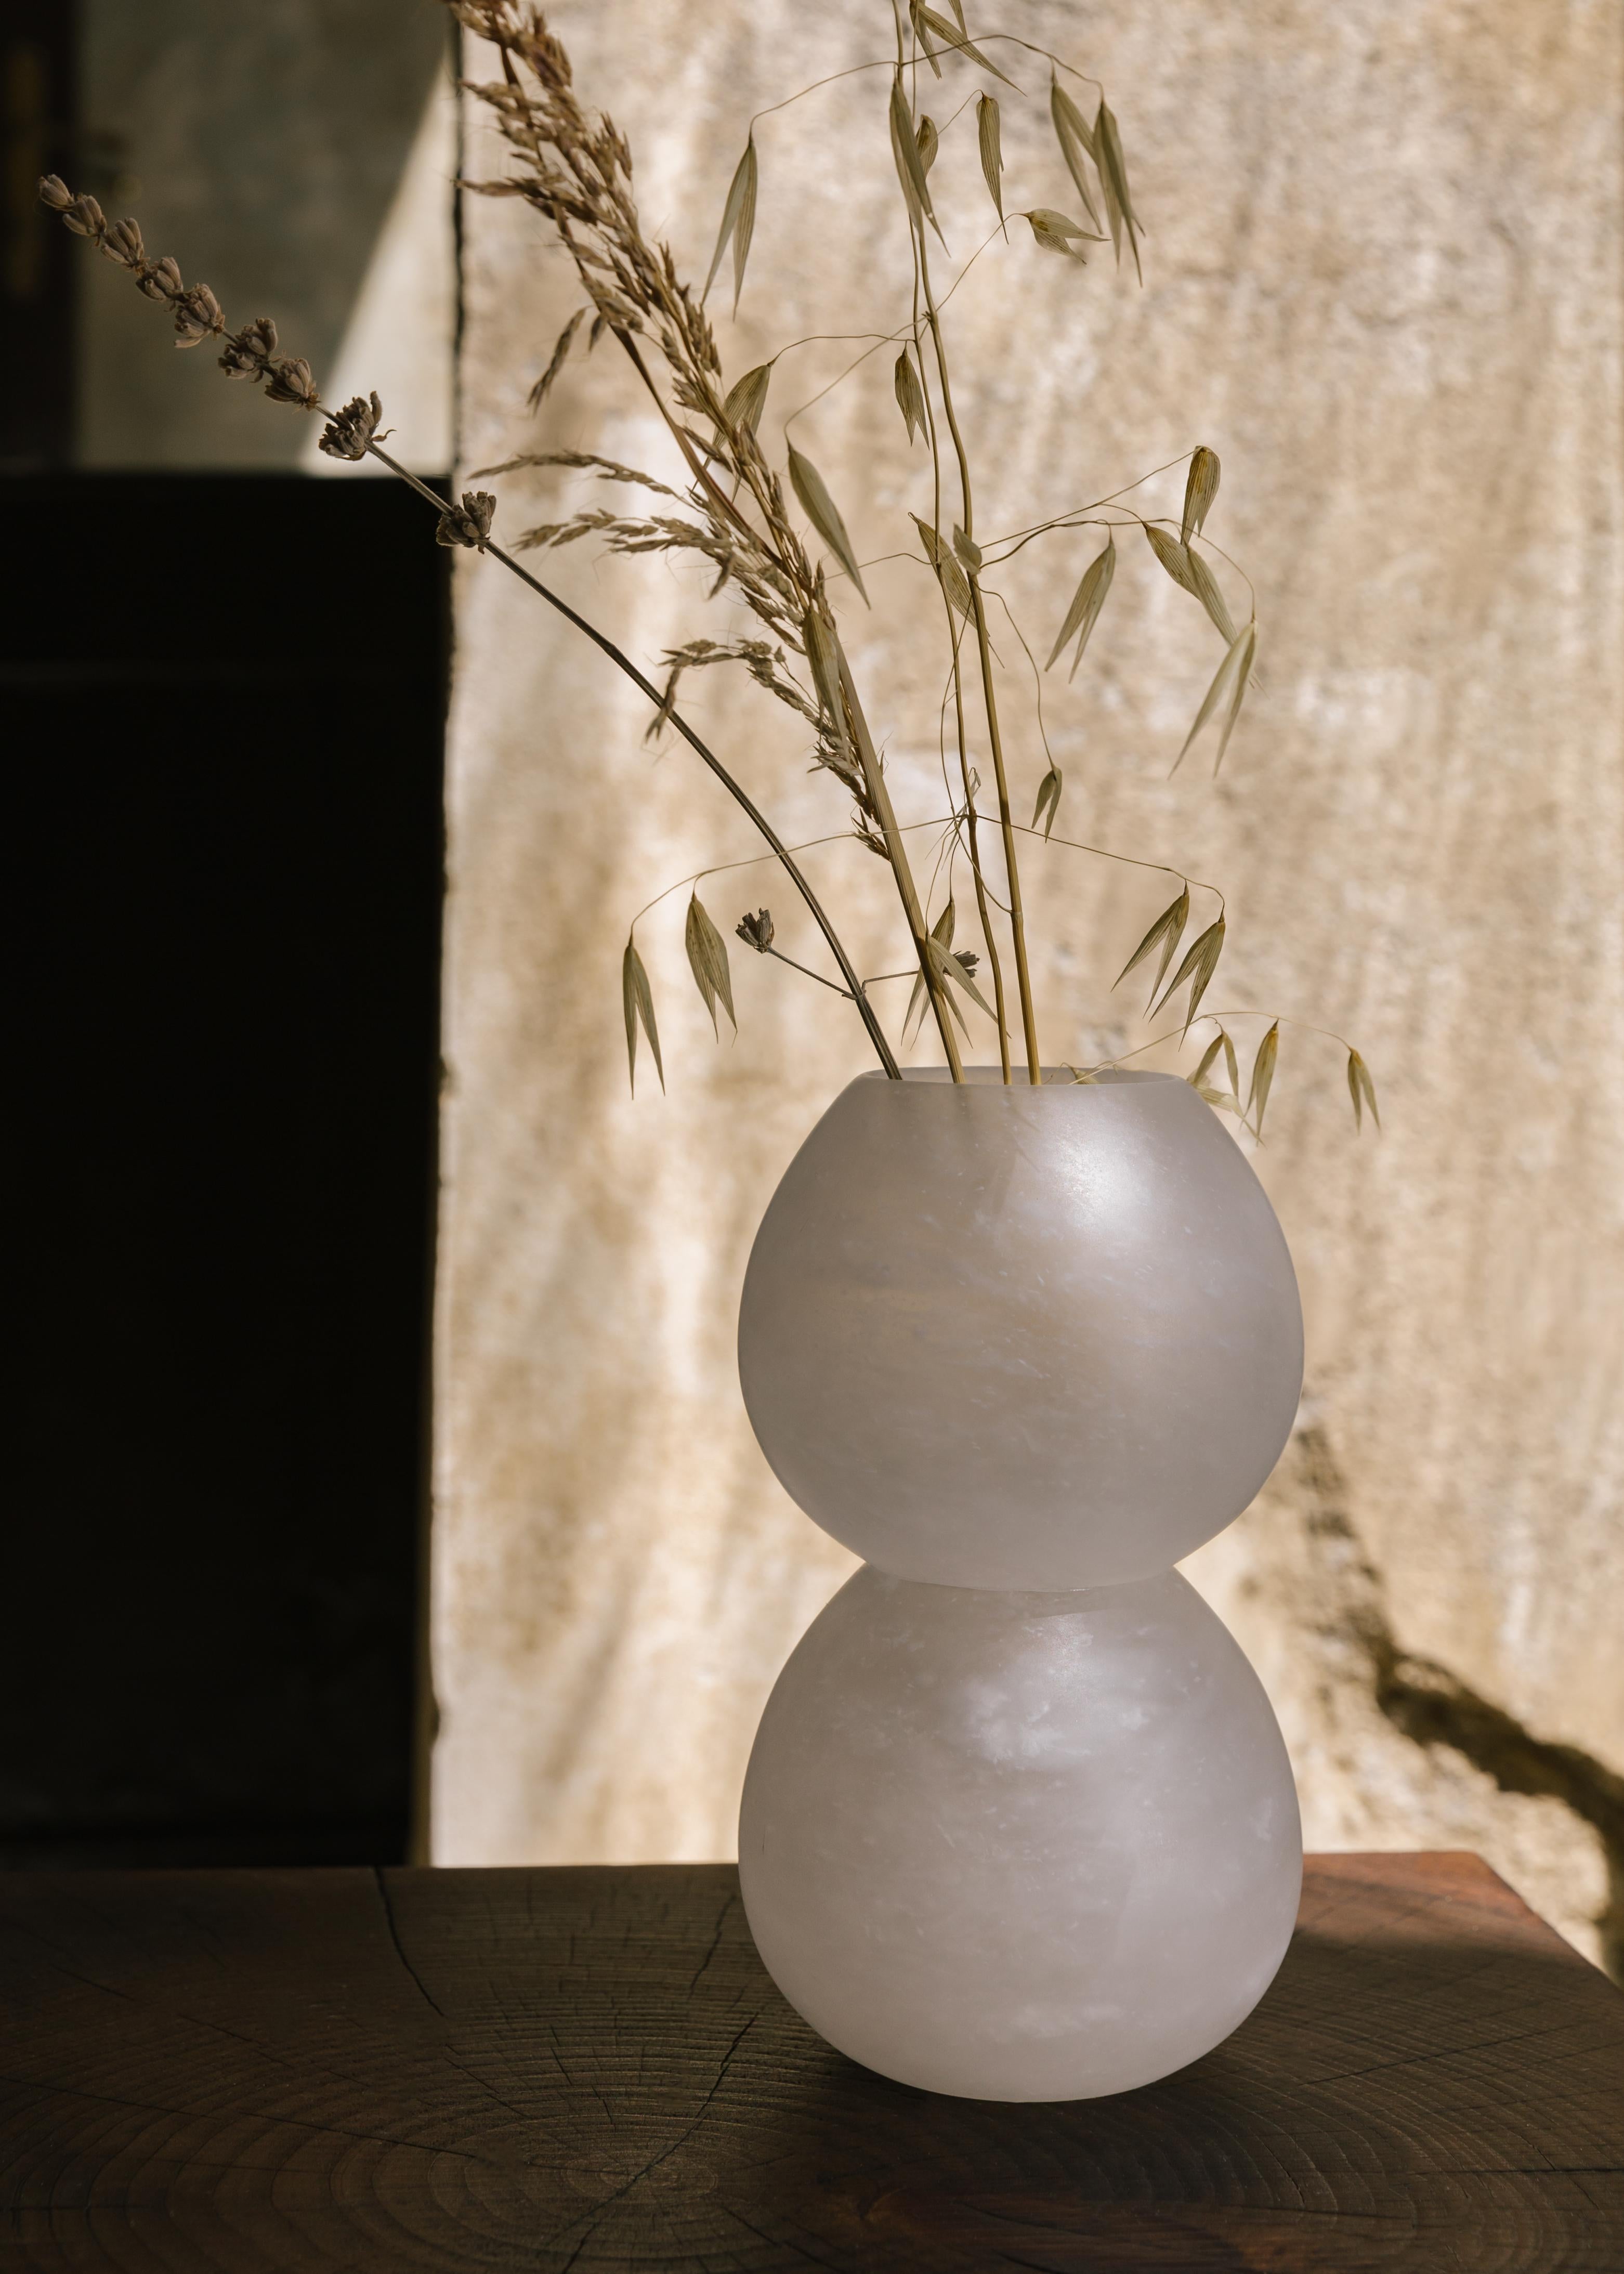 Zeri vessel by Karu
Dimensions: D 12 x H 22 cm
Materials: alabaster.

Contemporary Vessels inspired by Etruscan Antiquity.
Handcrafted in the hills of Tuscany.

Award-winning design firm Karu debuts its latest limited edition home accessories